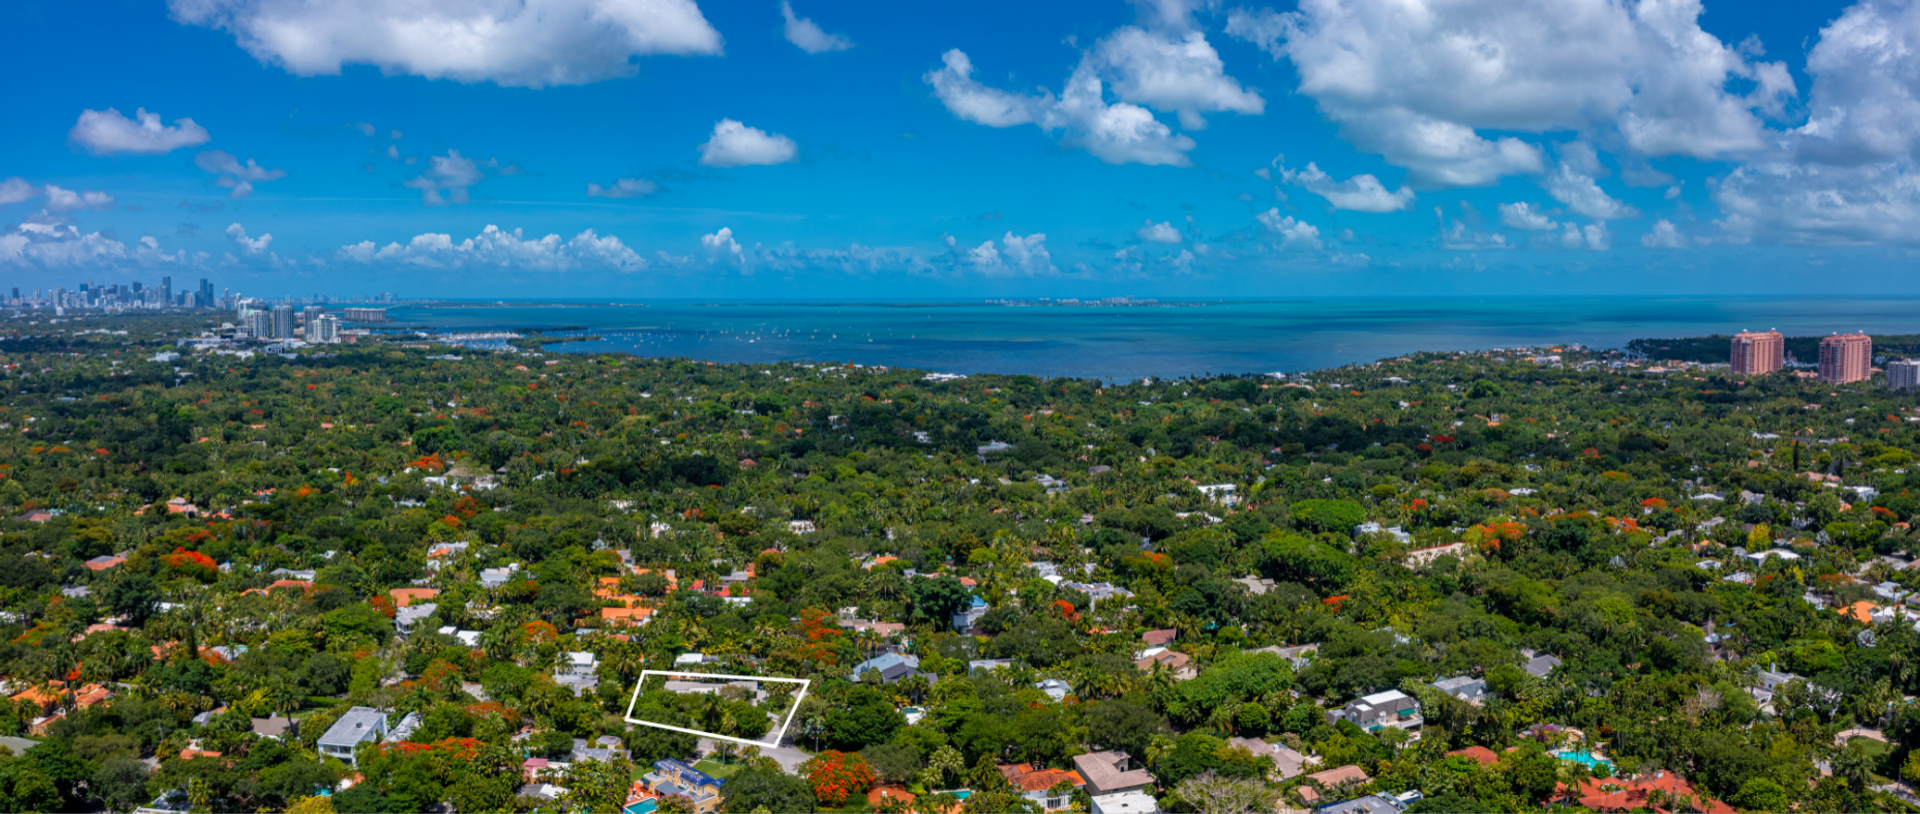 Aerial Photo of Coconut Grove